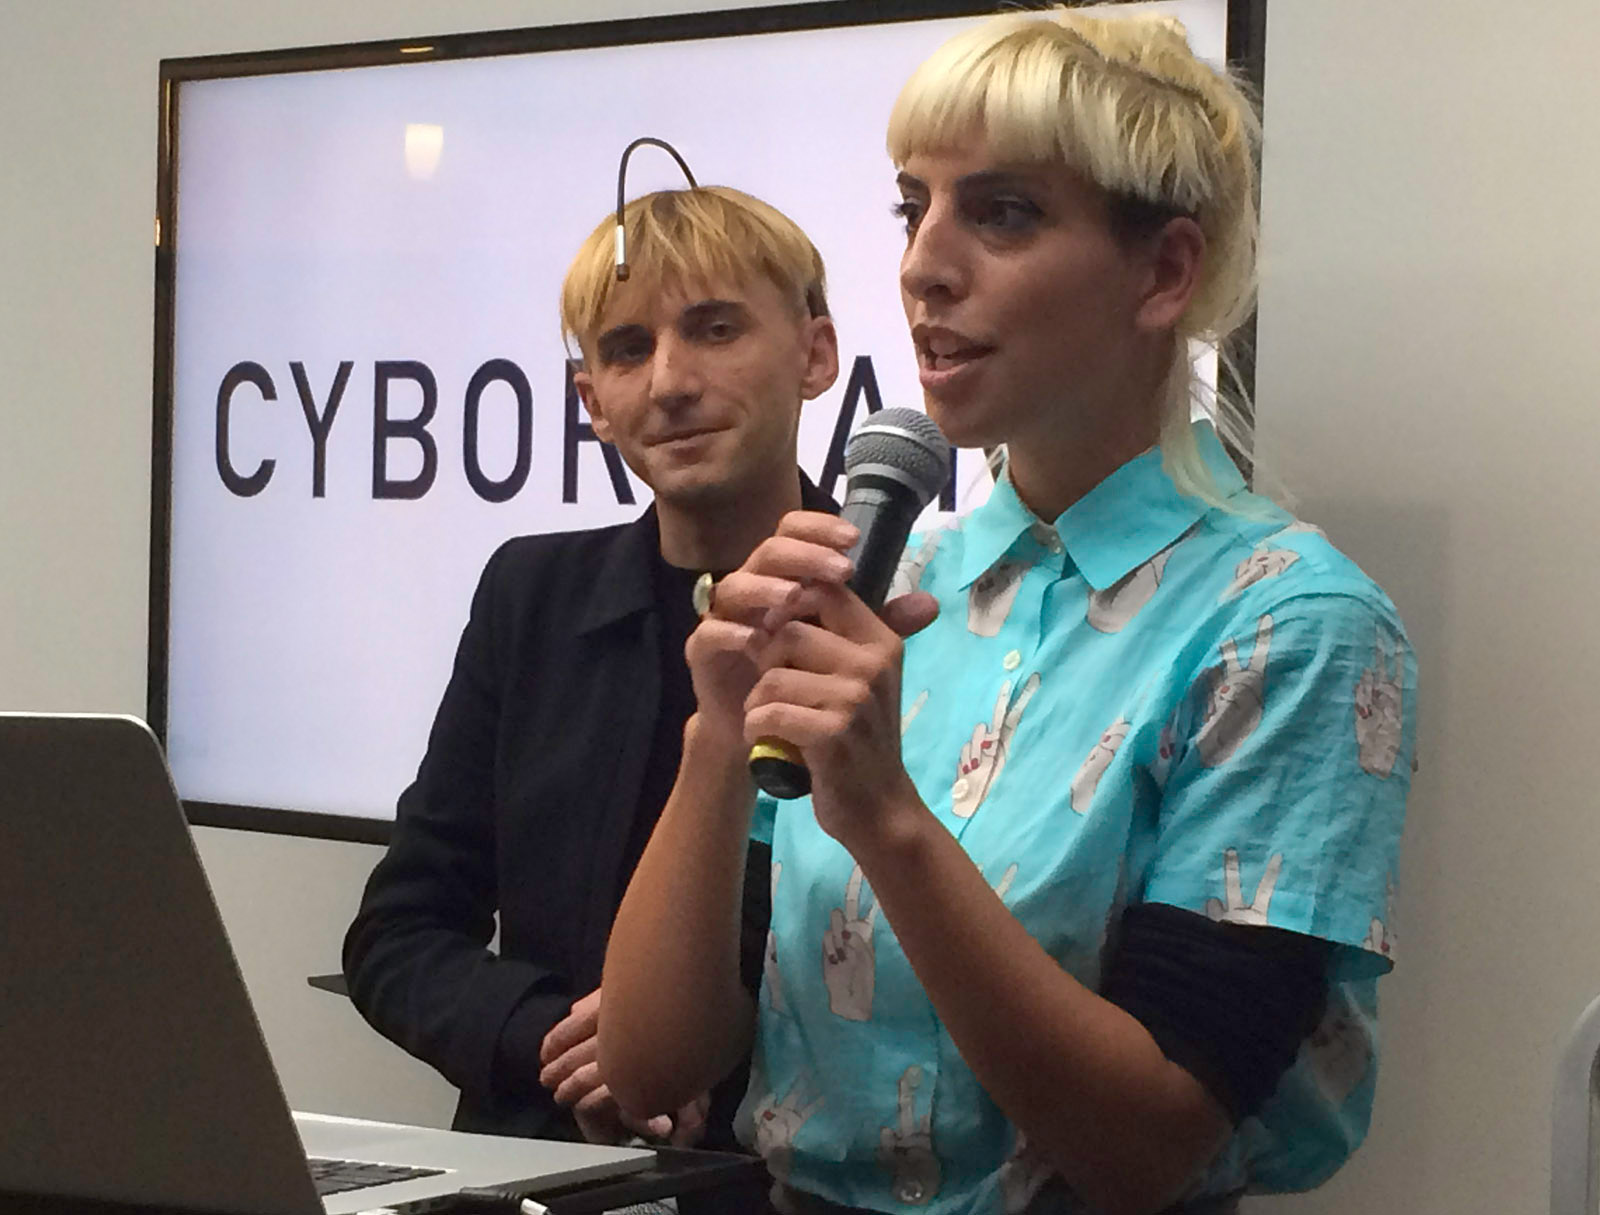 Moon Ribas speaking in front of a sign that says “Cyborg Art”